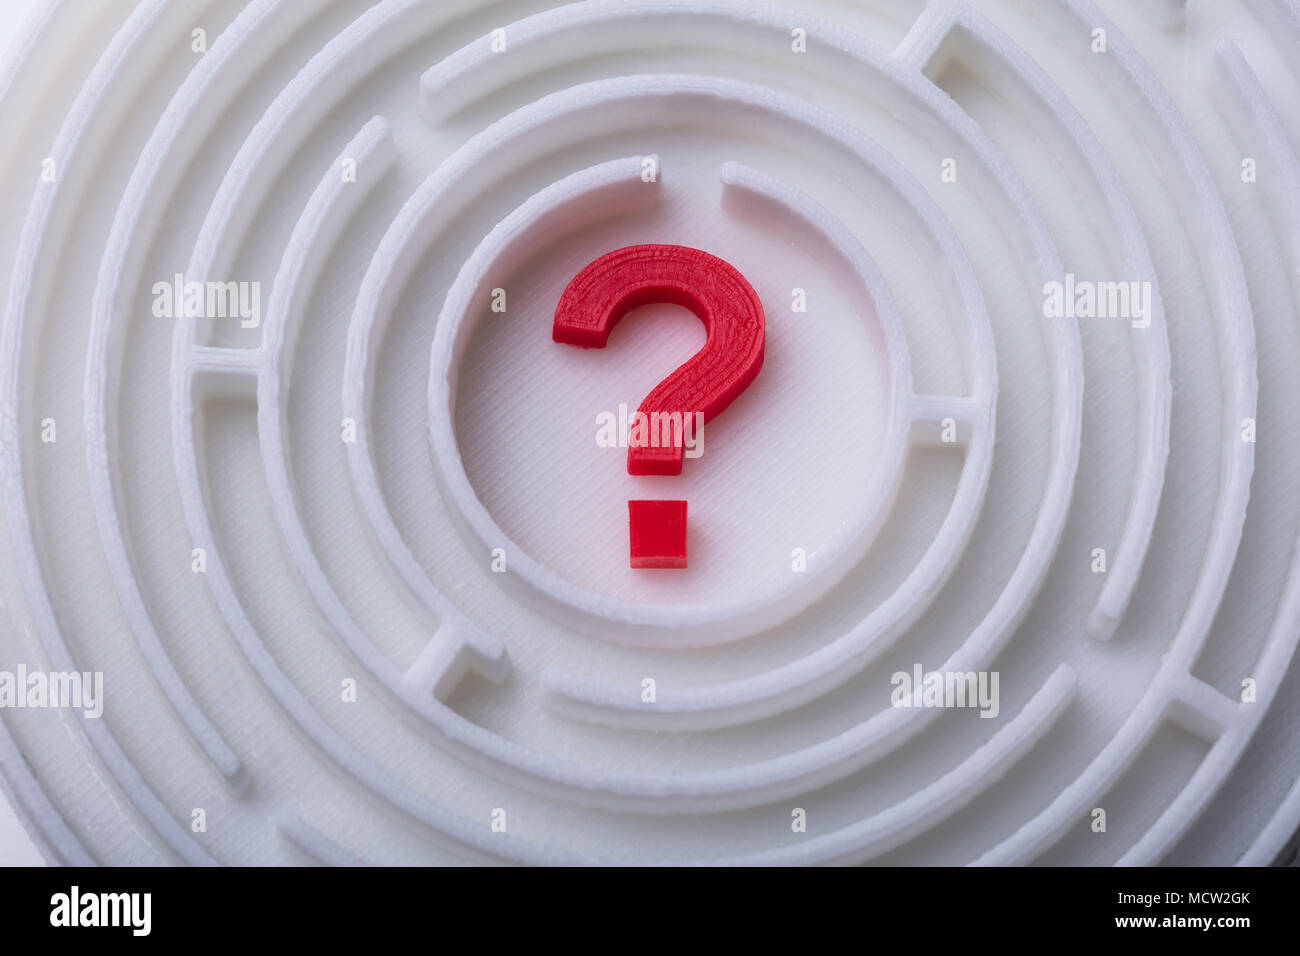 Elevated View Of Maze With Red Question Mark In Center Stock Photo